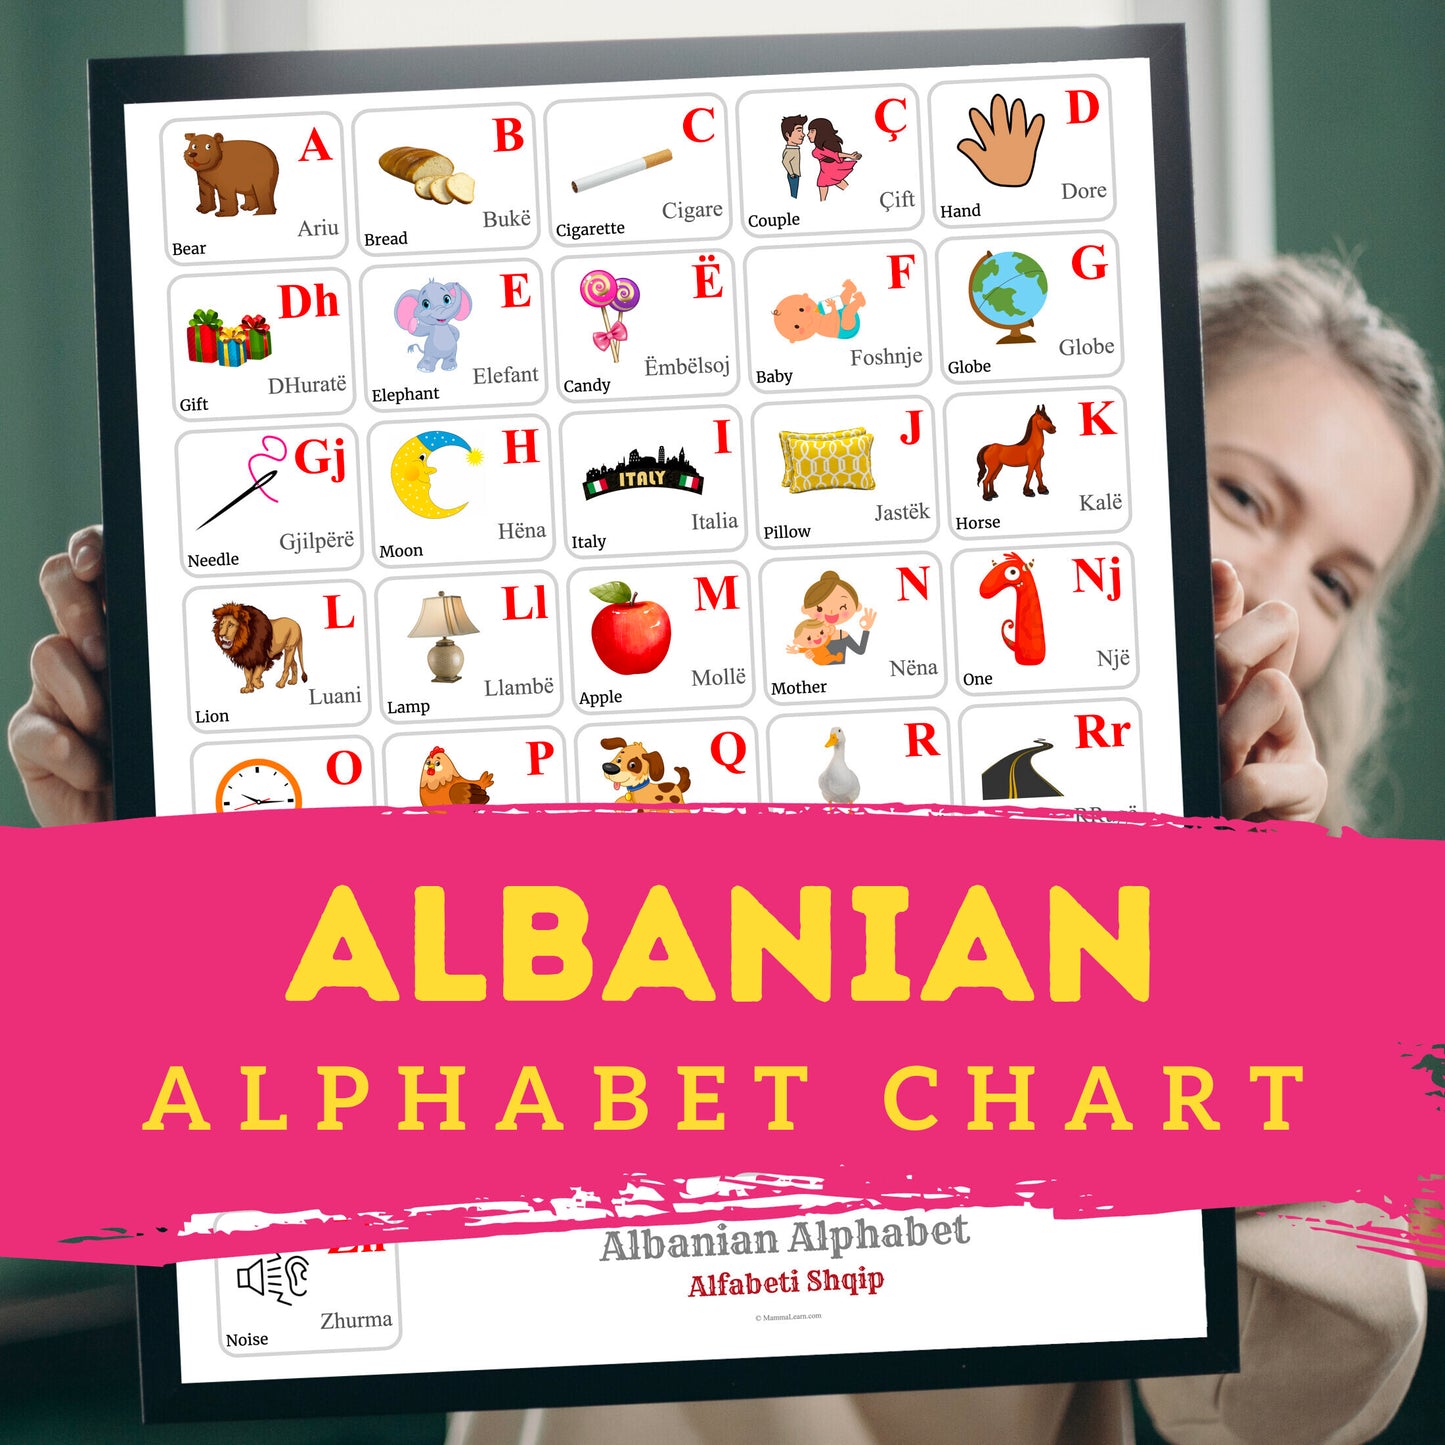 Albanian Alphabet Poster | Chart, Colorful